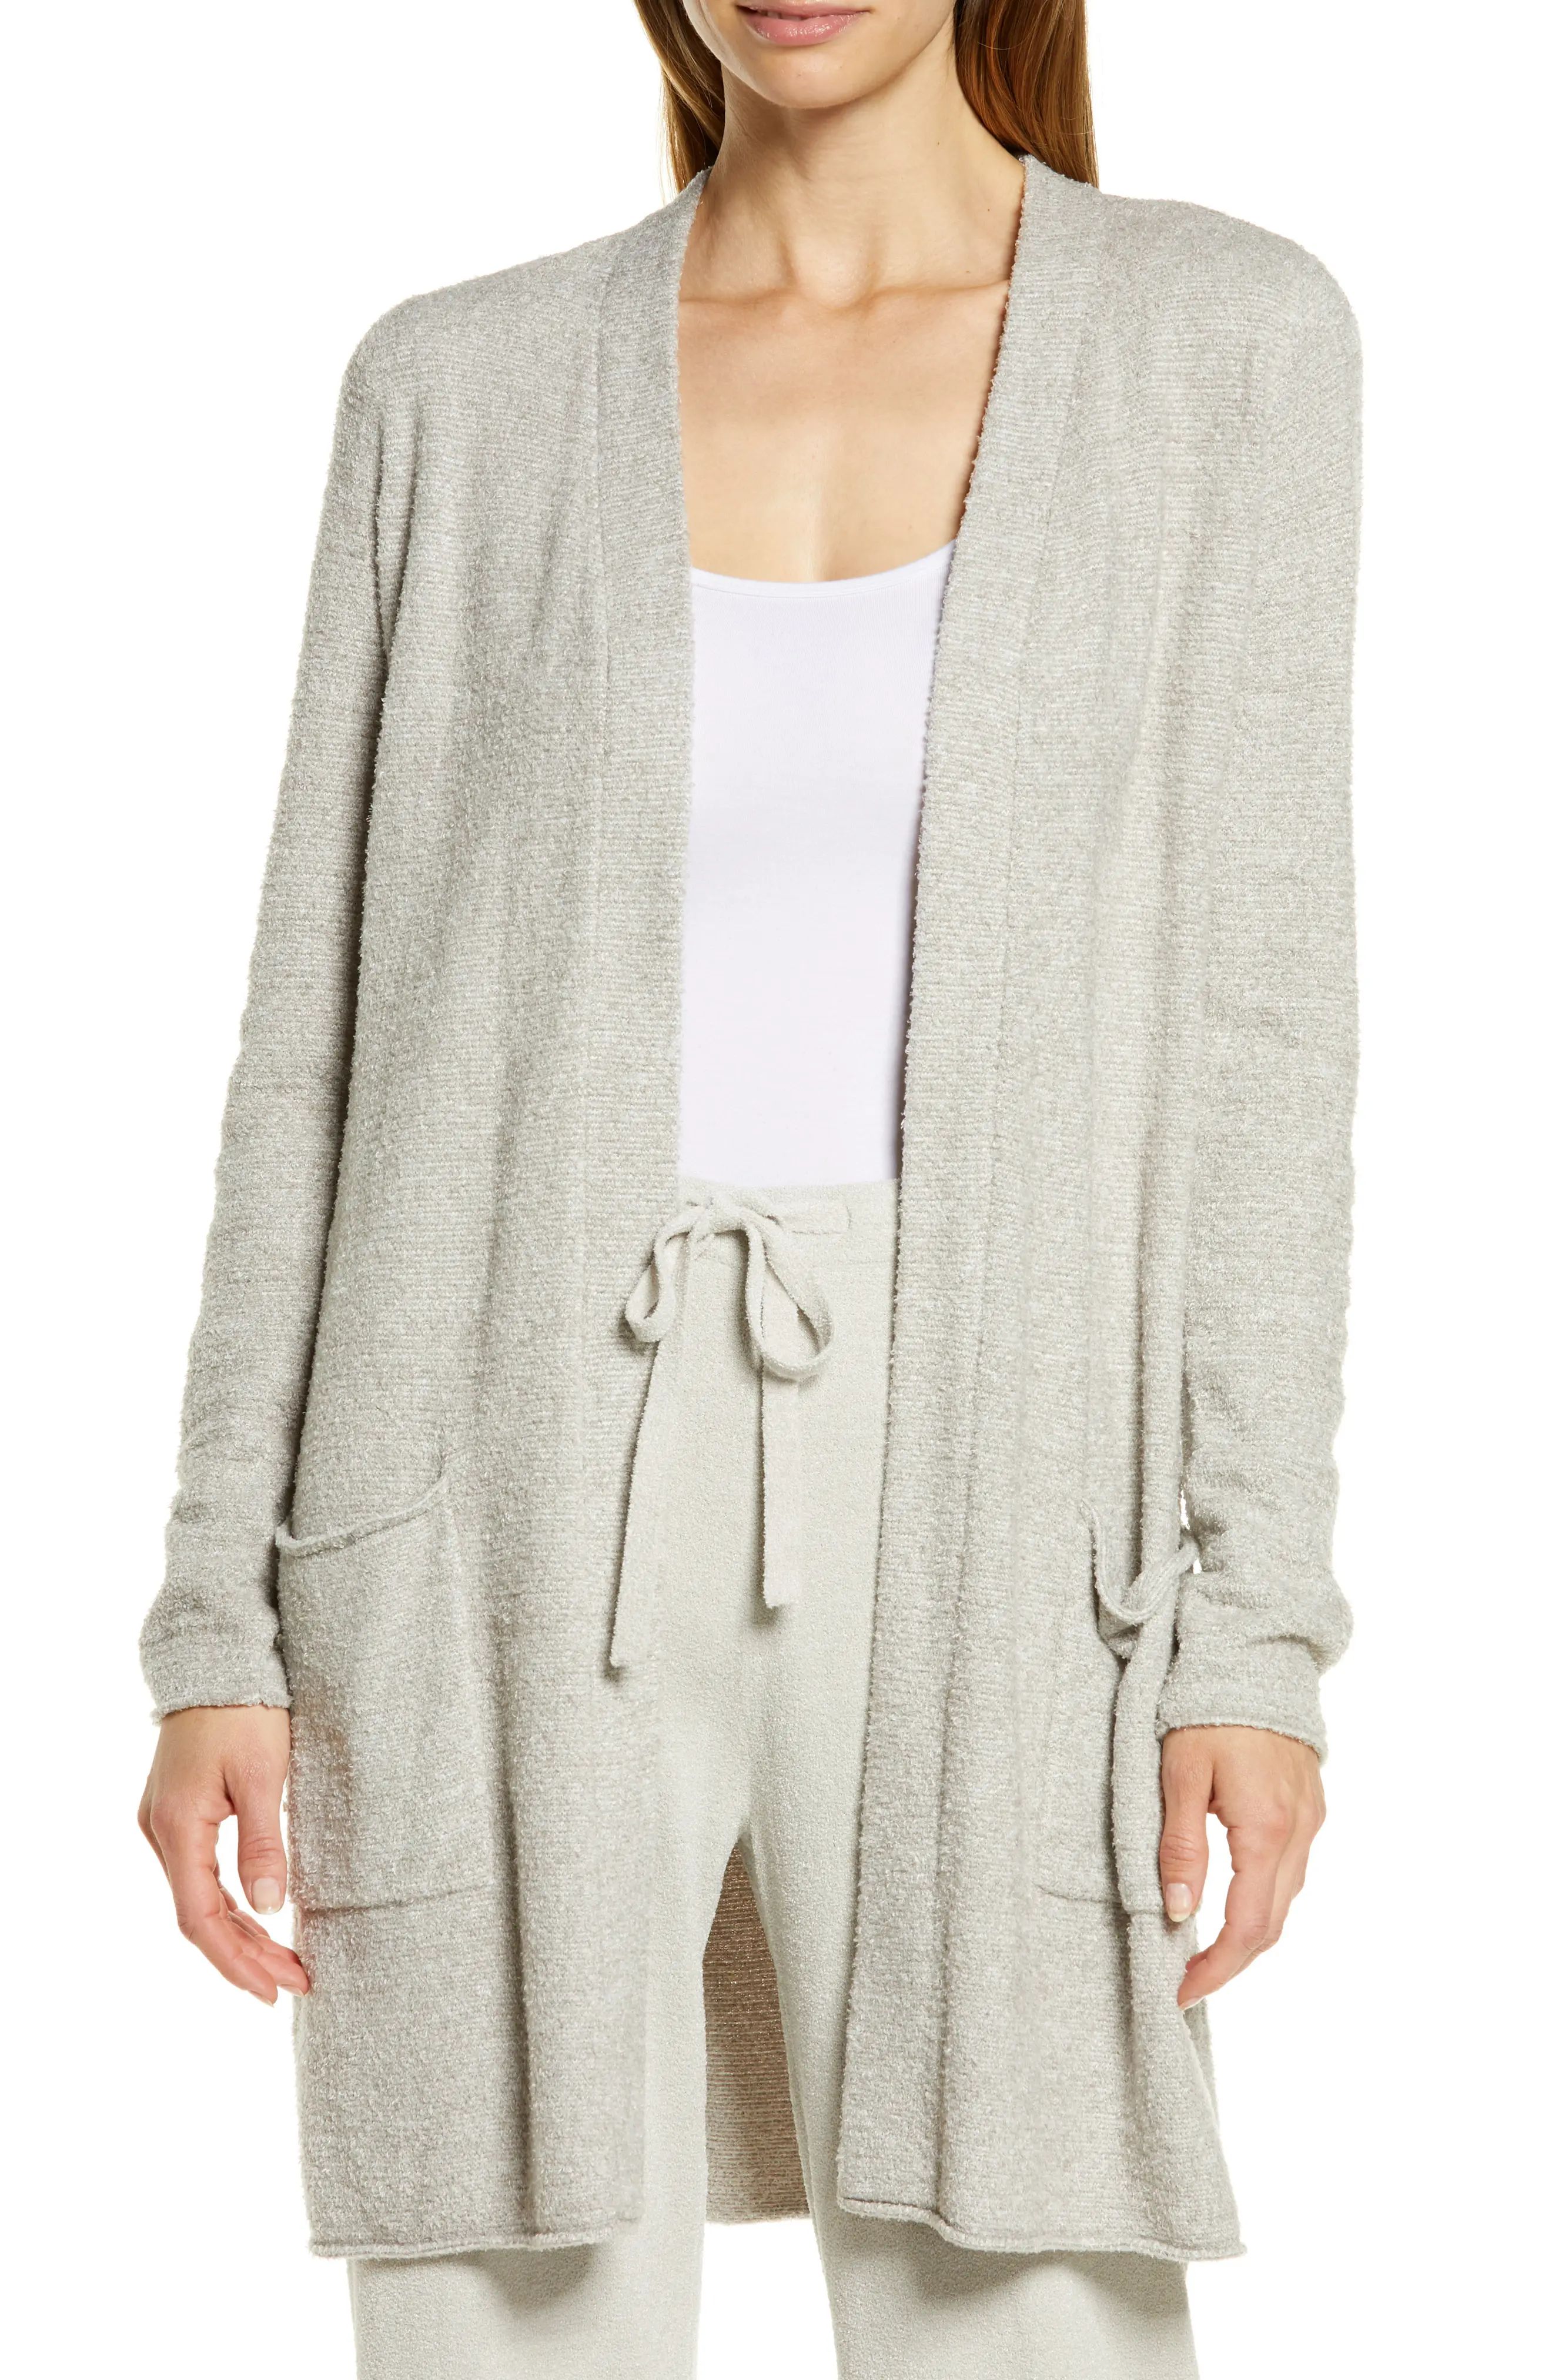 Barefoot Dreams(R) CozyChic Lite(R) Long Cardigan in He Pewter/Pearl at Nordstrom, Size Medium | Nordstrom